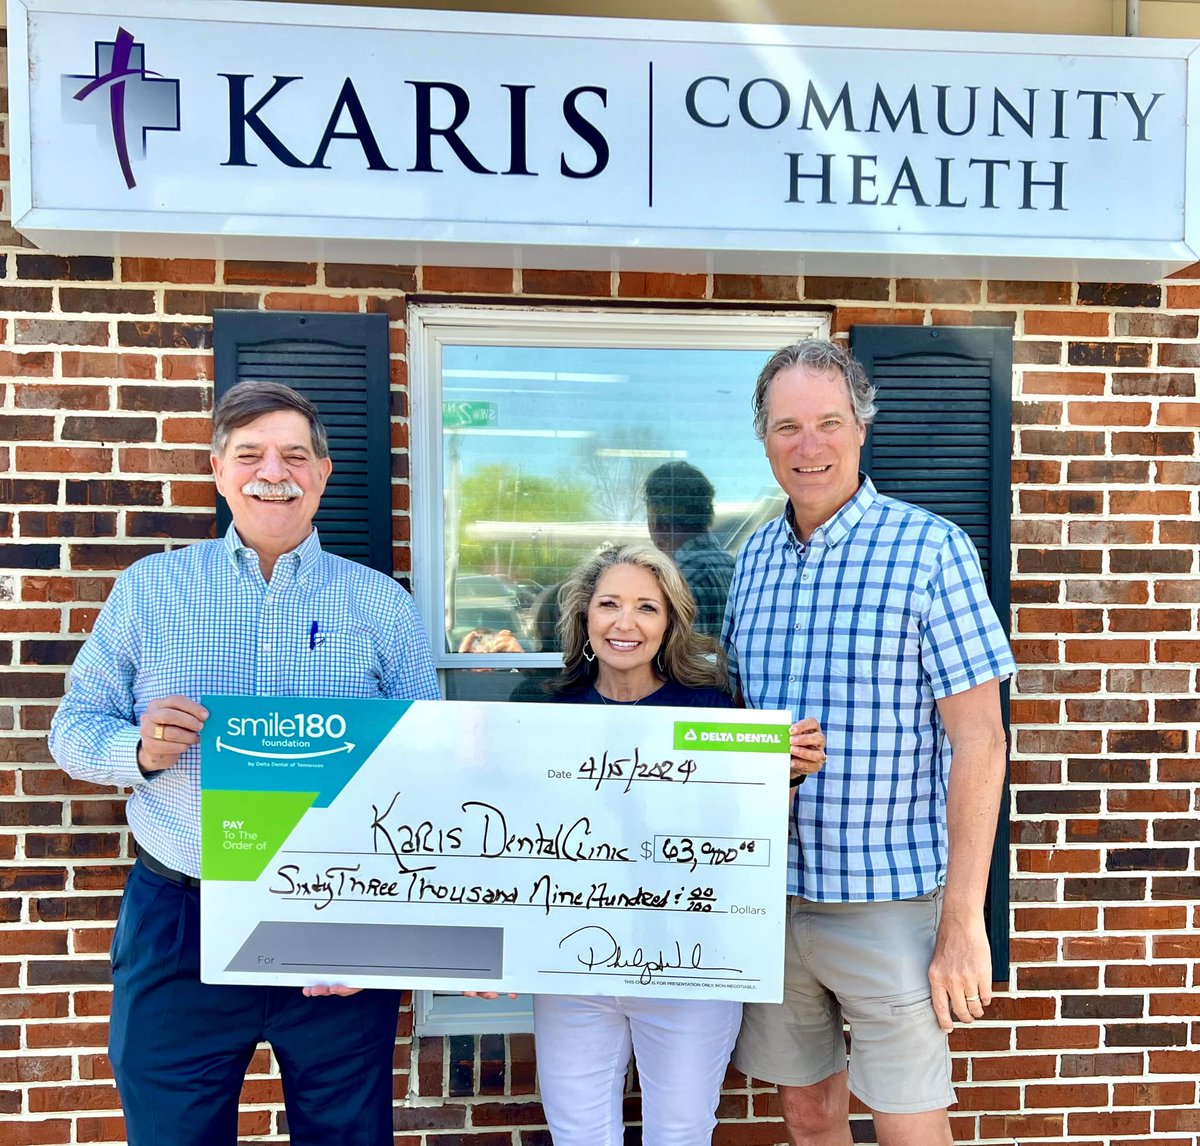 Welcome to Friday #MemberMoments, where we recognize #TeamTCCN Members. First up, @KarisCommunityHealth! In 2015, Karis Dental opened its doors offering restorative, life-changing dentistry. Since then, they have added medical services and rebranded as Karis Community Health.